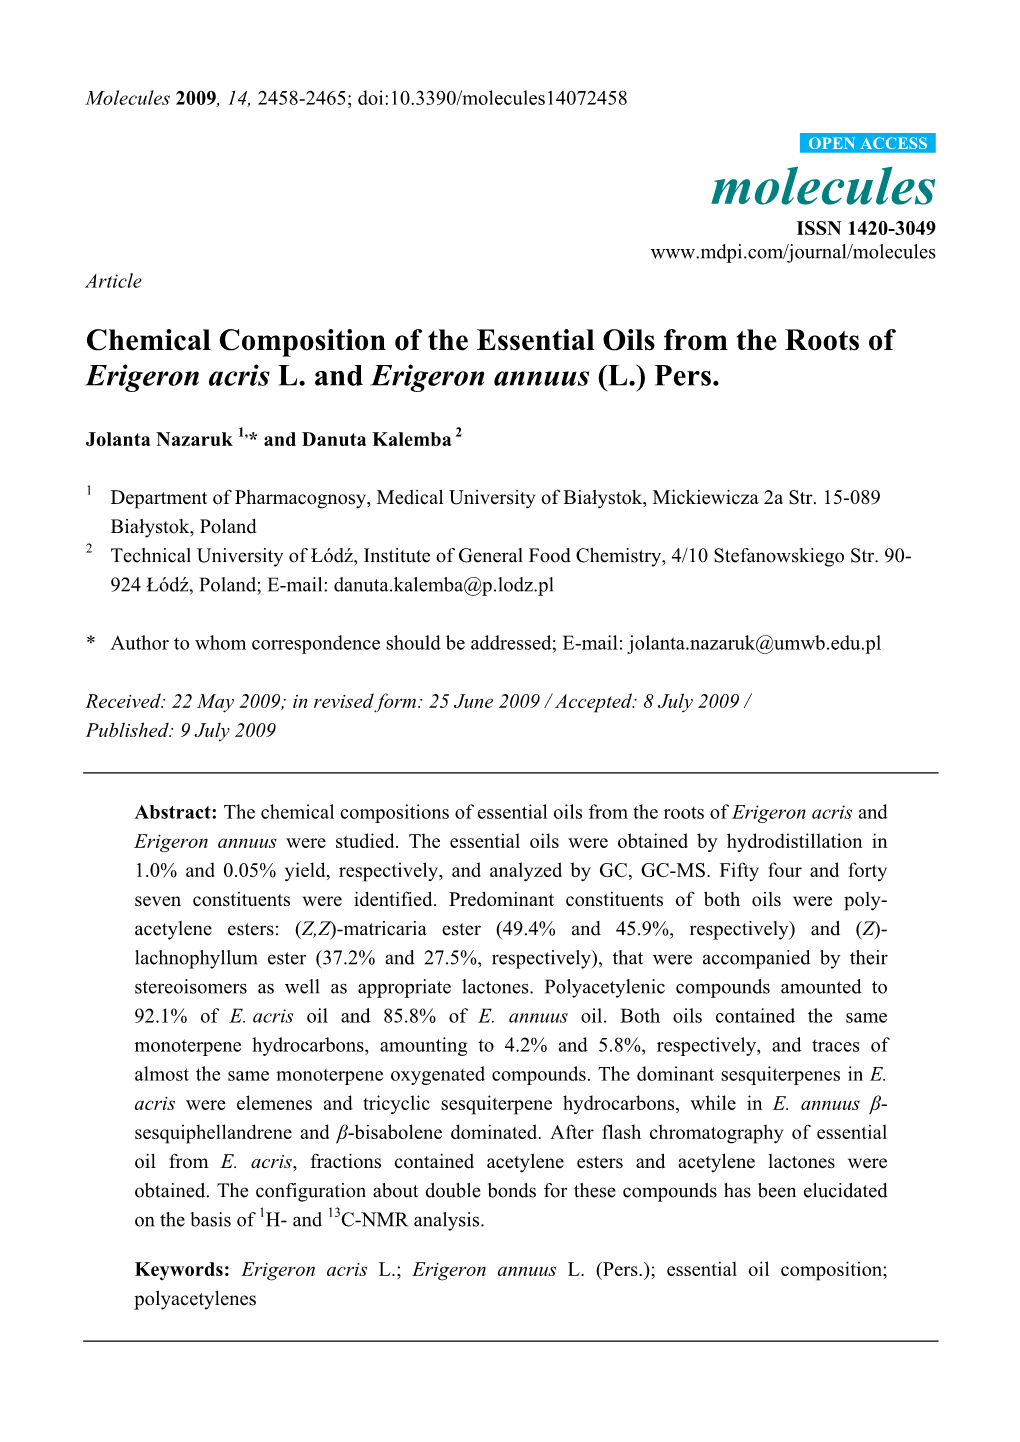 Chemical Composition of the Essential Oils from the Roots of Erigeron Acris L